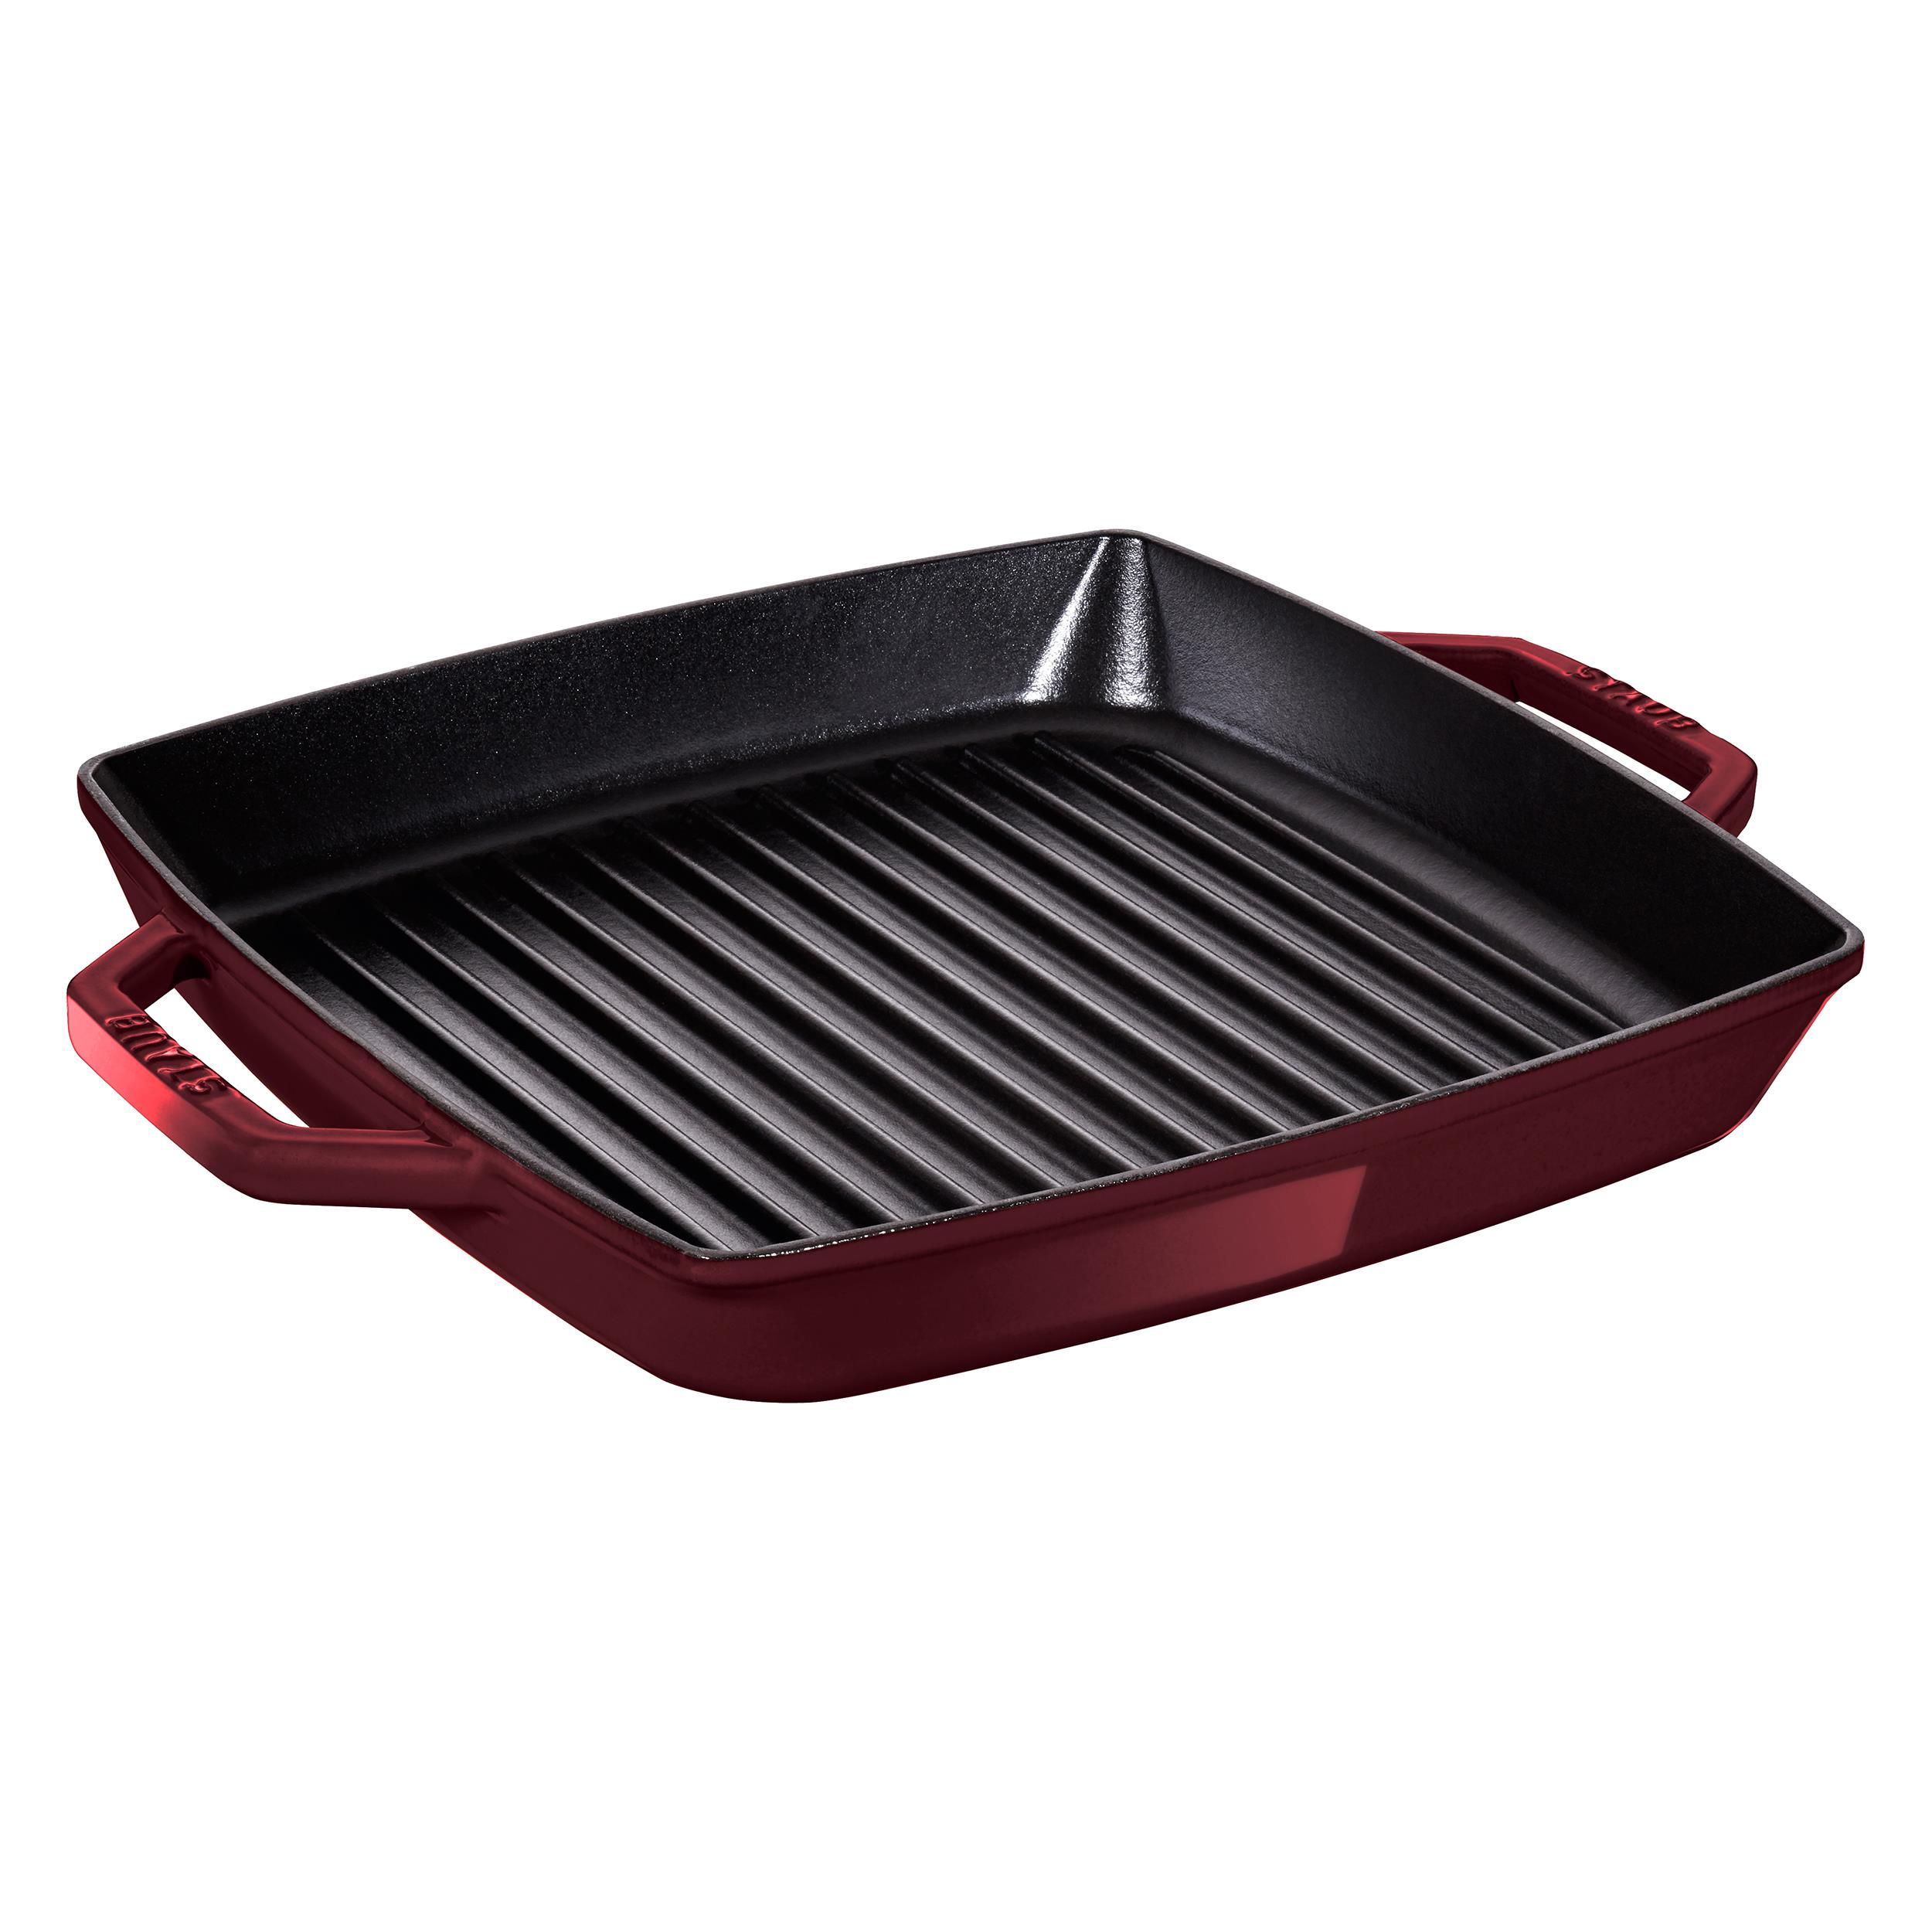 13'' Enameled Cast Iron Broiler Pan with Rack